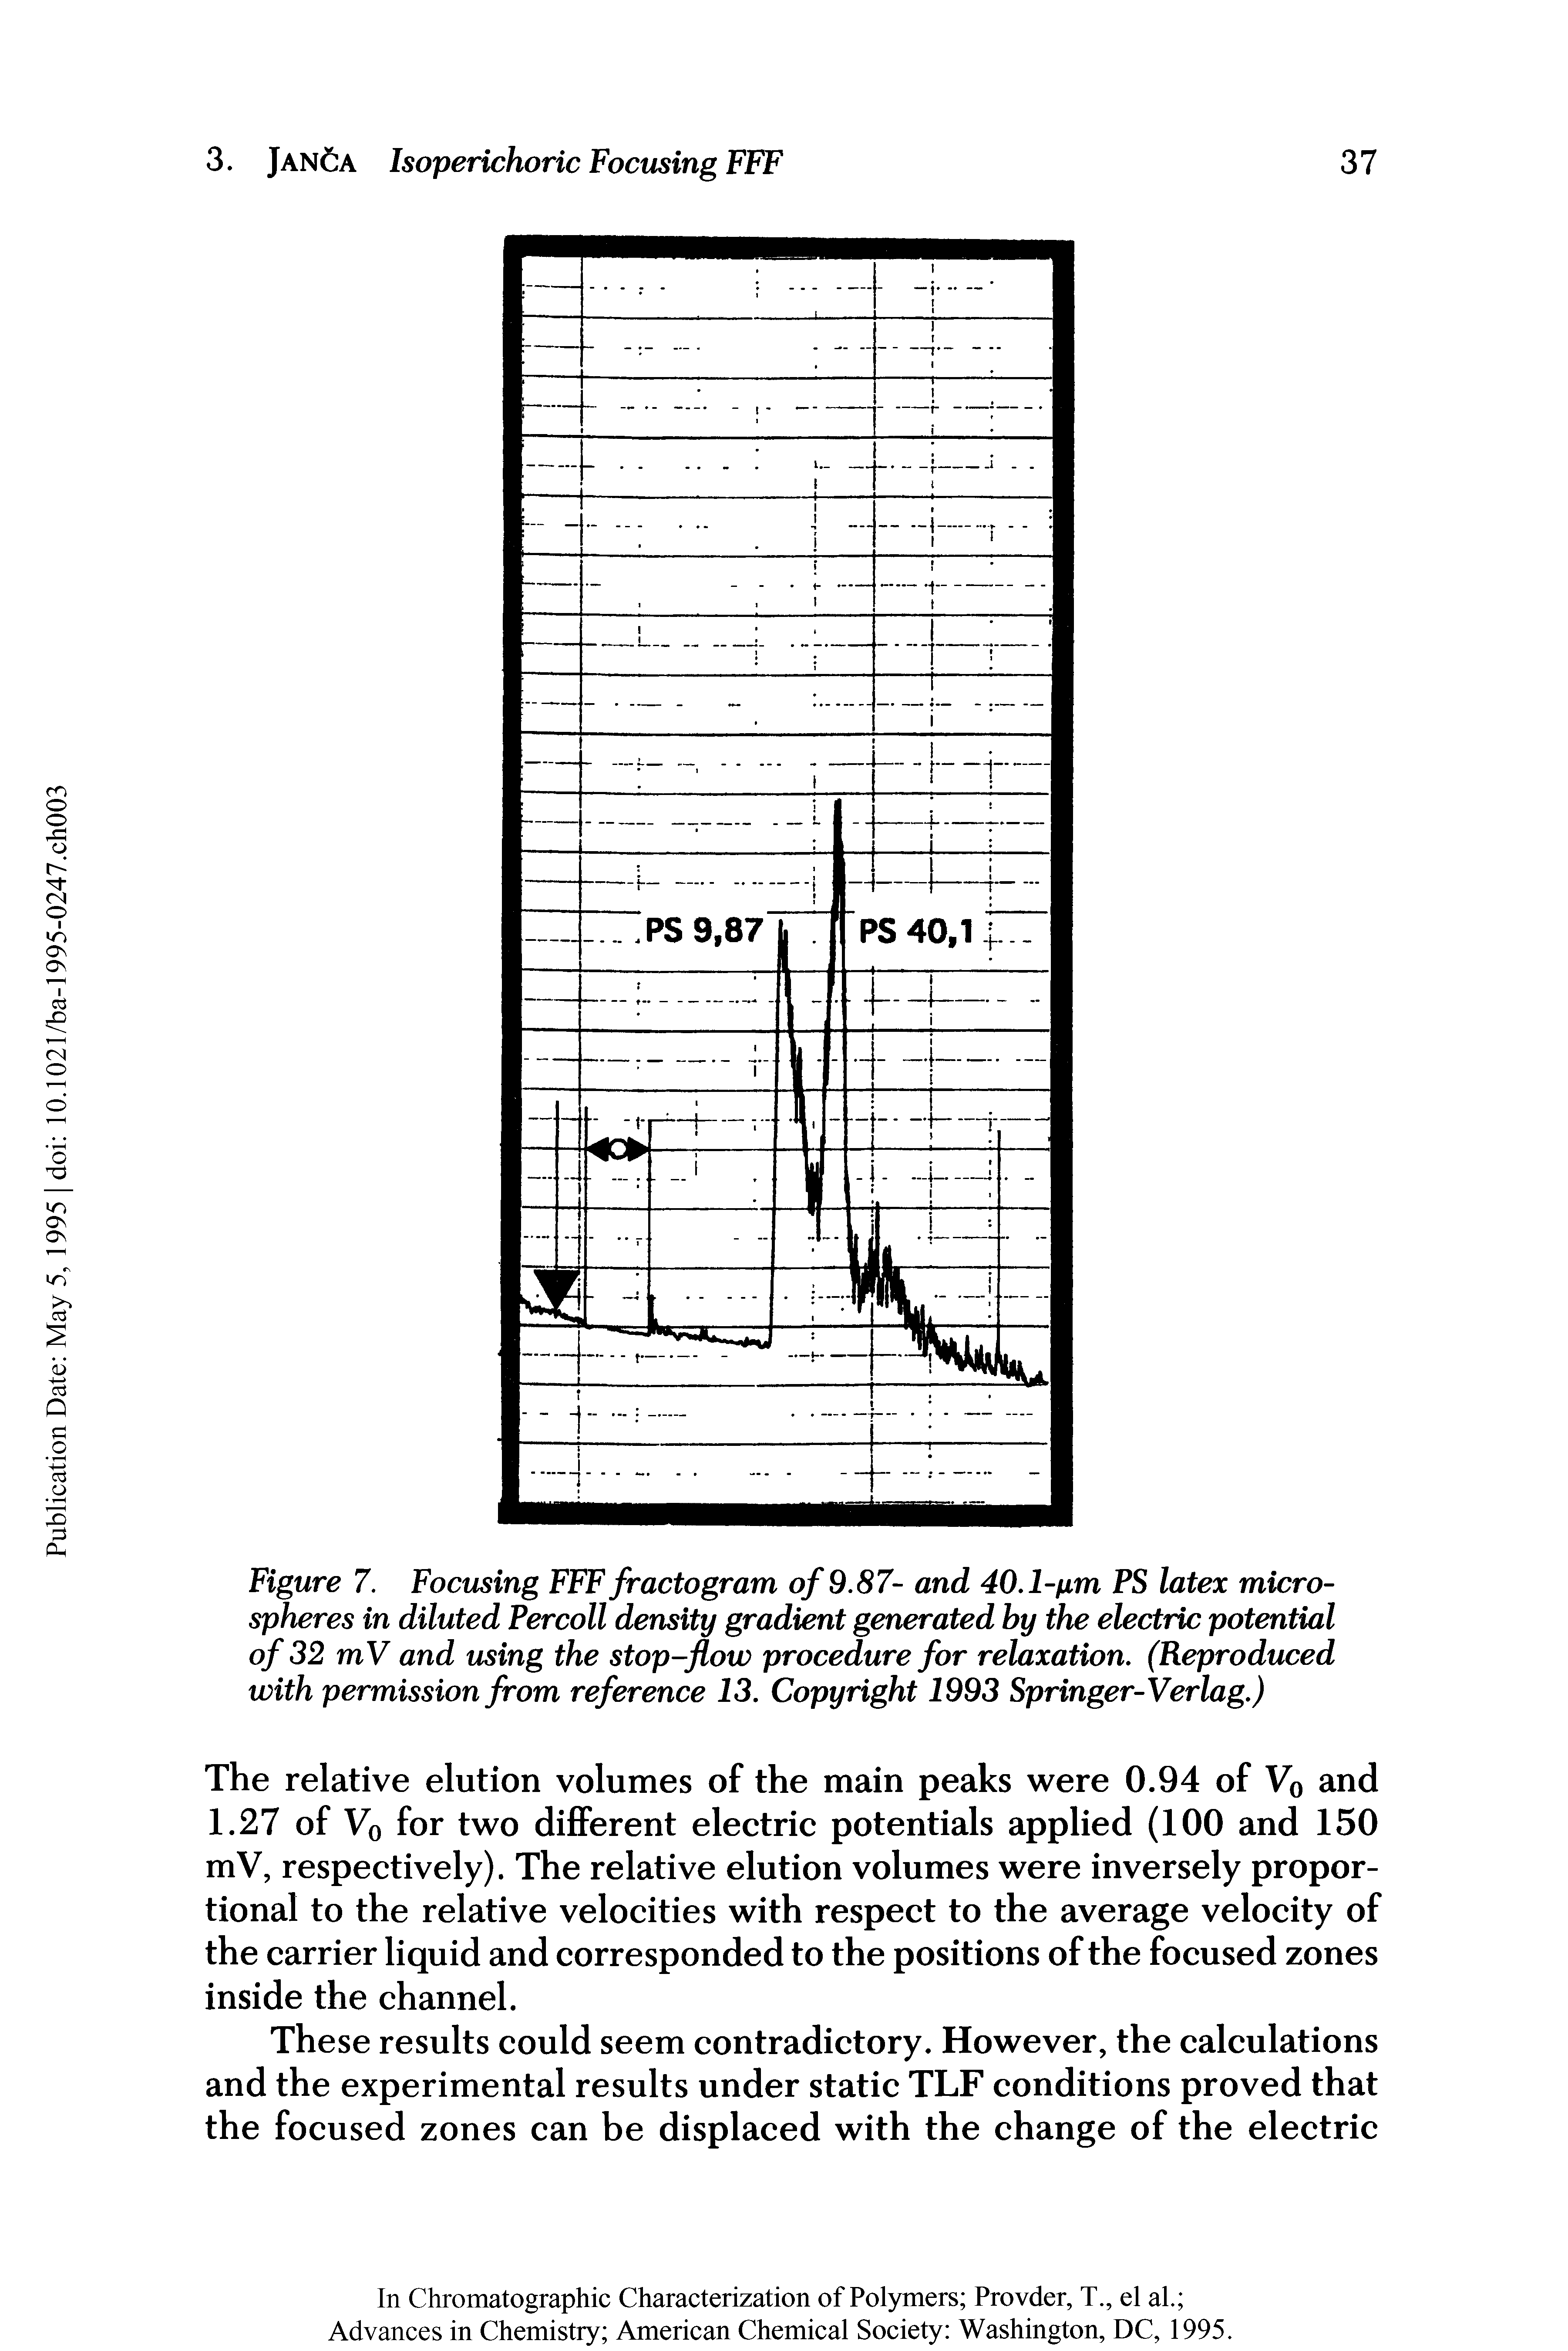 Figure 7. Focusing FFF fractogram of 9.87- and 40.1-iim PS latex microspheres in diluted Percoll density gradient generated by the electric potential of 32 mV and using the stop-flow procedure for relaxation. (Reproduced with permission from reference 13. Copyright 1993 Springer-Verlag.)...